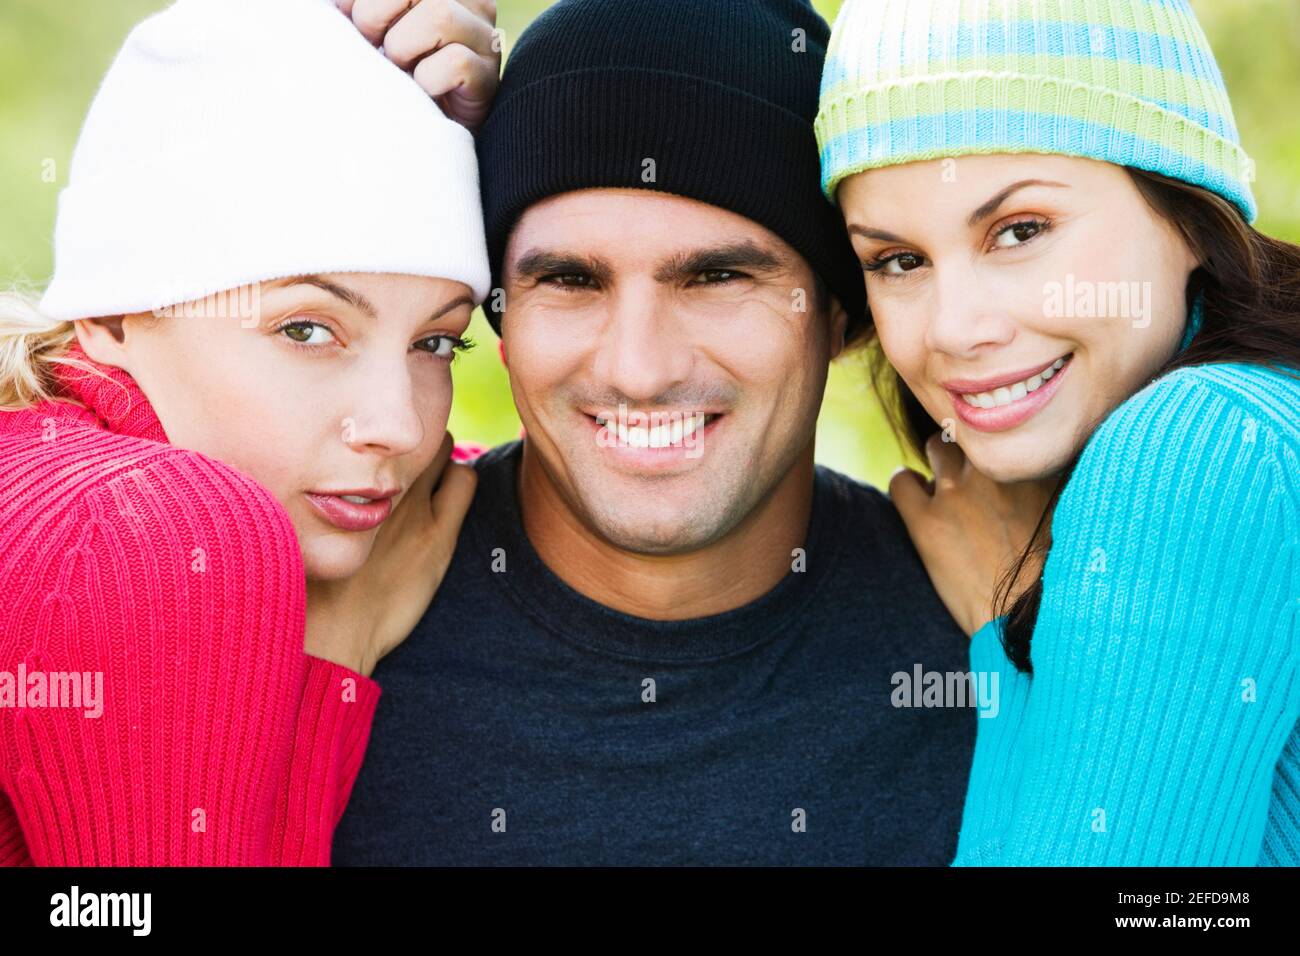 Portrait of a mid adult man and two young women smiling Stock Photo